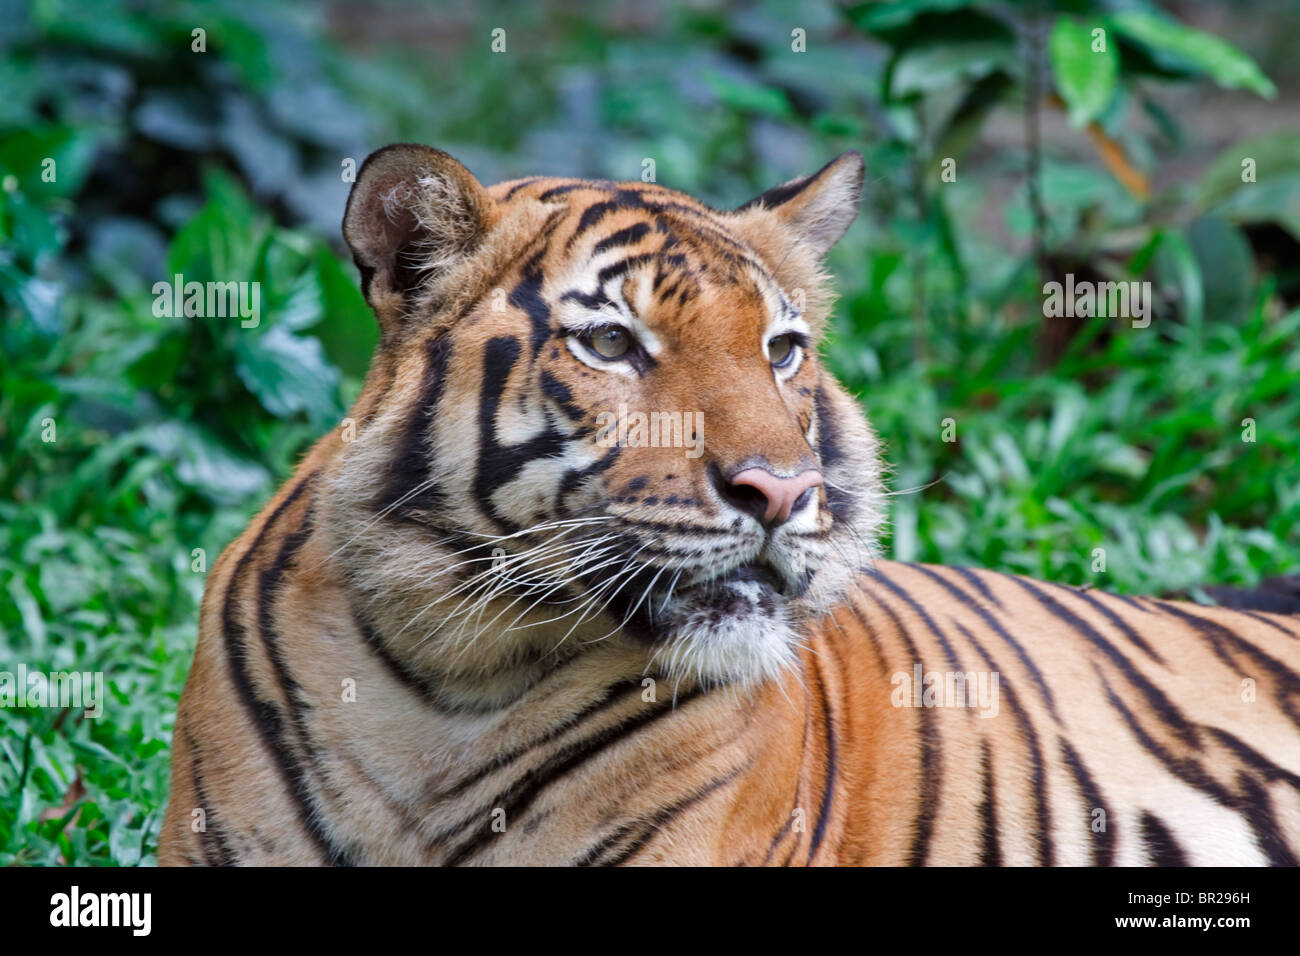 Malayan Tiger a recently identified subspecies found in Malaysia and Thailand. Endangered species. Stock Photo